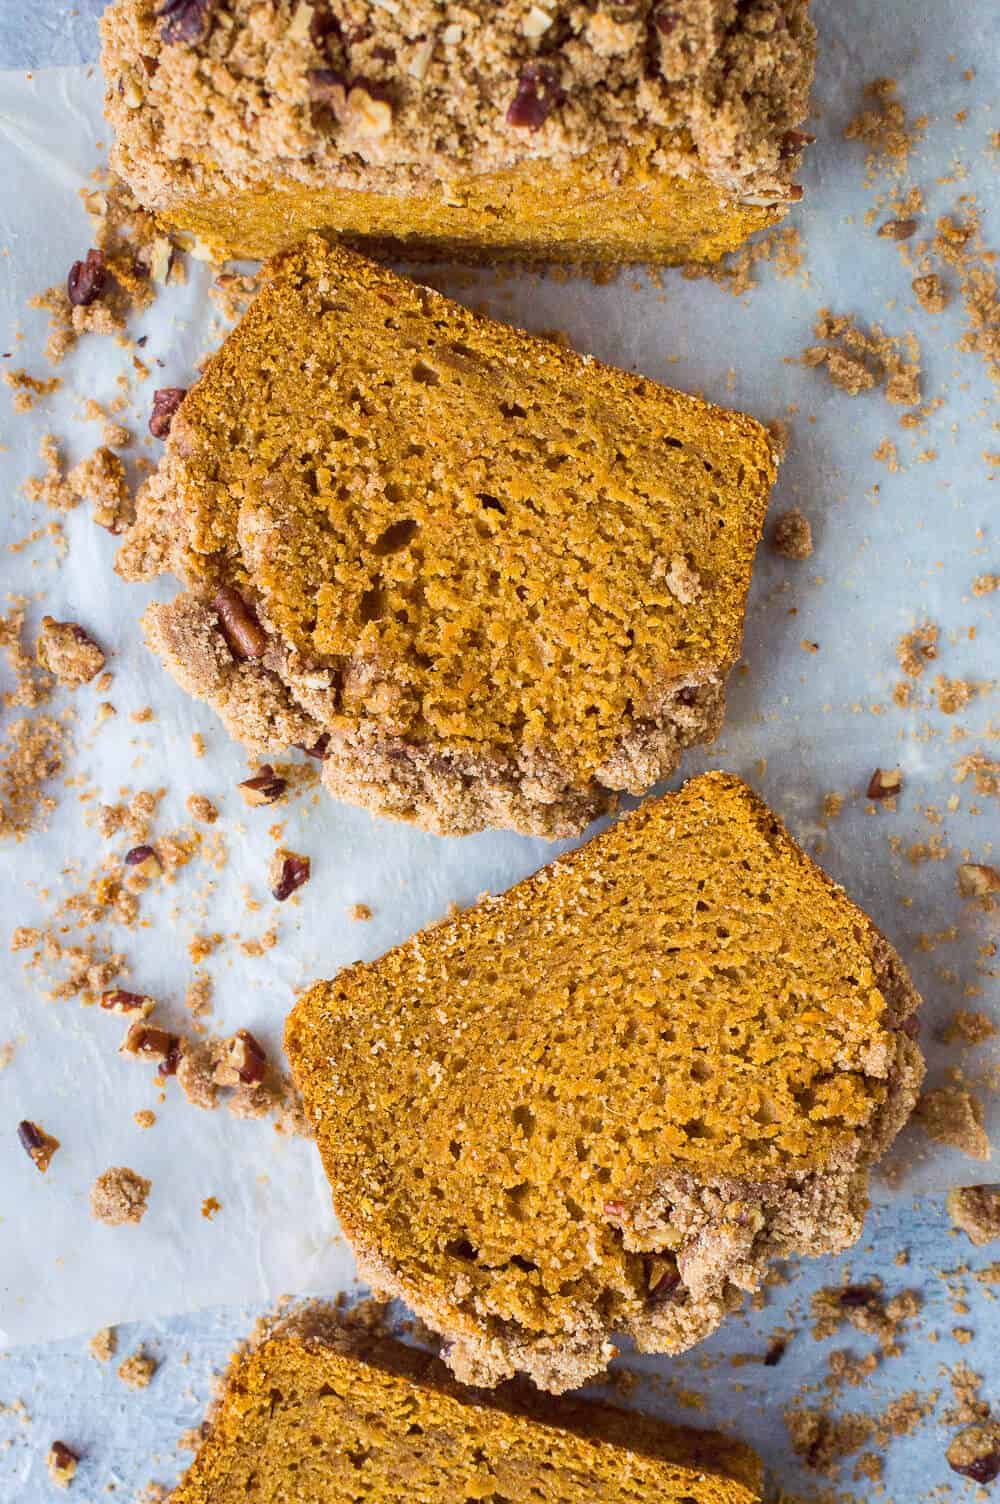 Sweet potato bread with pecan streusel - a vegan version of the classic Autumnal loaf cake with a crisp, buttery pecan crumble topping. #vegan #fallbaking #baking #sweetpotato #streusel #coffeecake